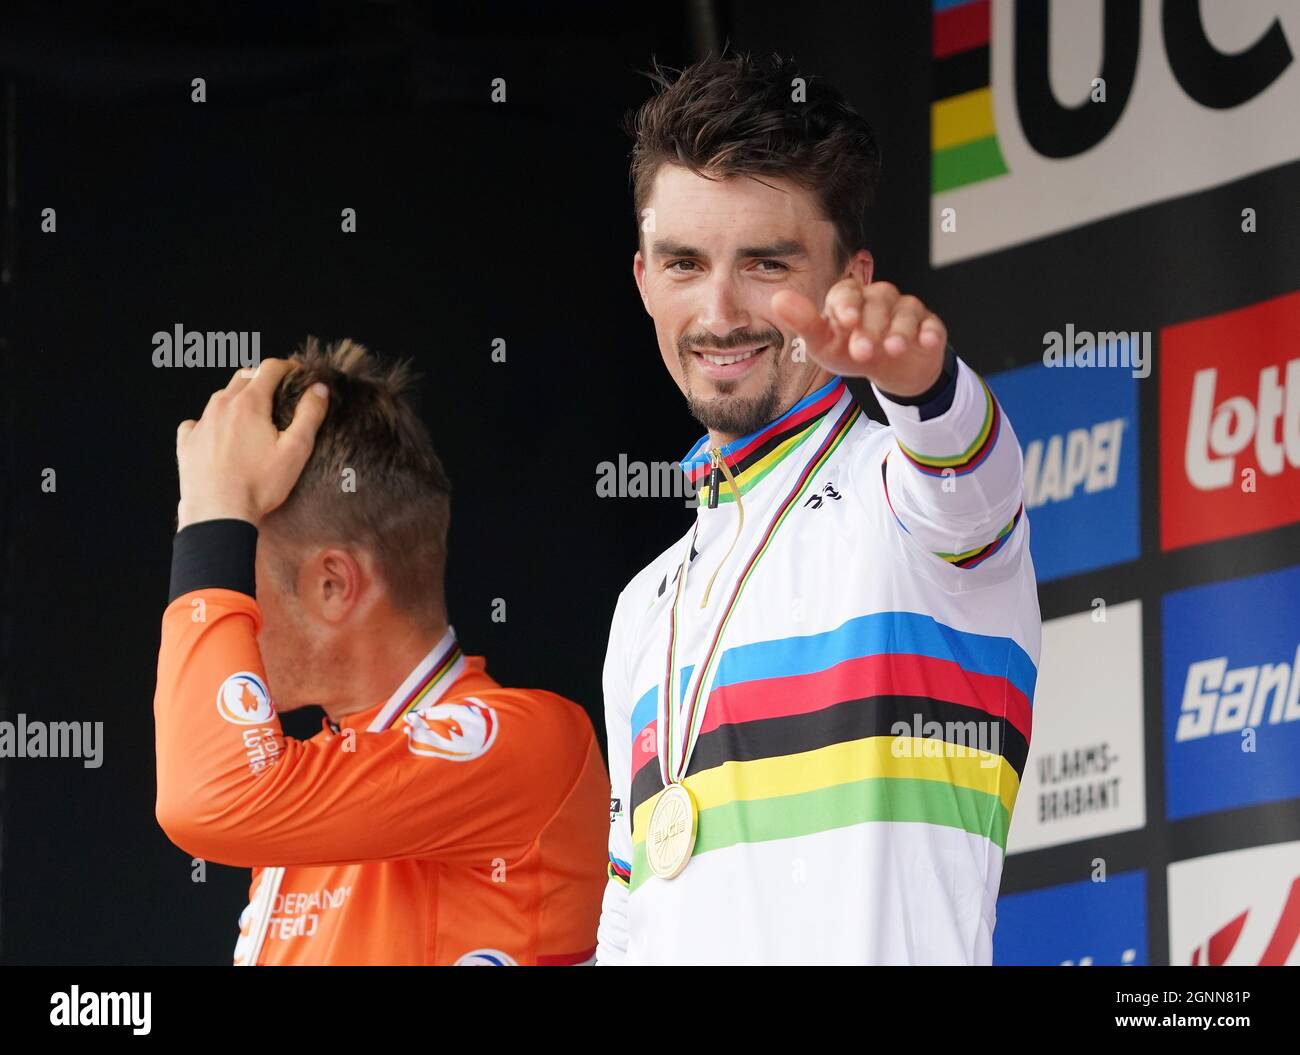 Dylan Van Baarle (NED) and Julian Alaphilippe (FRA) pictured on the podium of the road race of the UCI World Championships Road Cycling Flanders 2021 on Sunday 26 September 2021 at Leuven in Belgium. Photo by SCS/Soenar Chamid/AFLO (HOLLAND OUT) Stock Photo